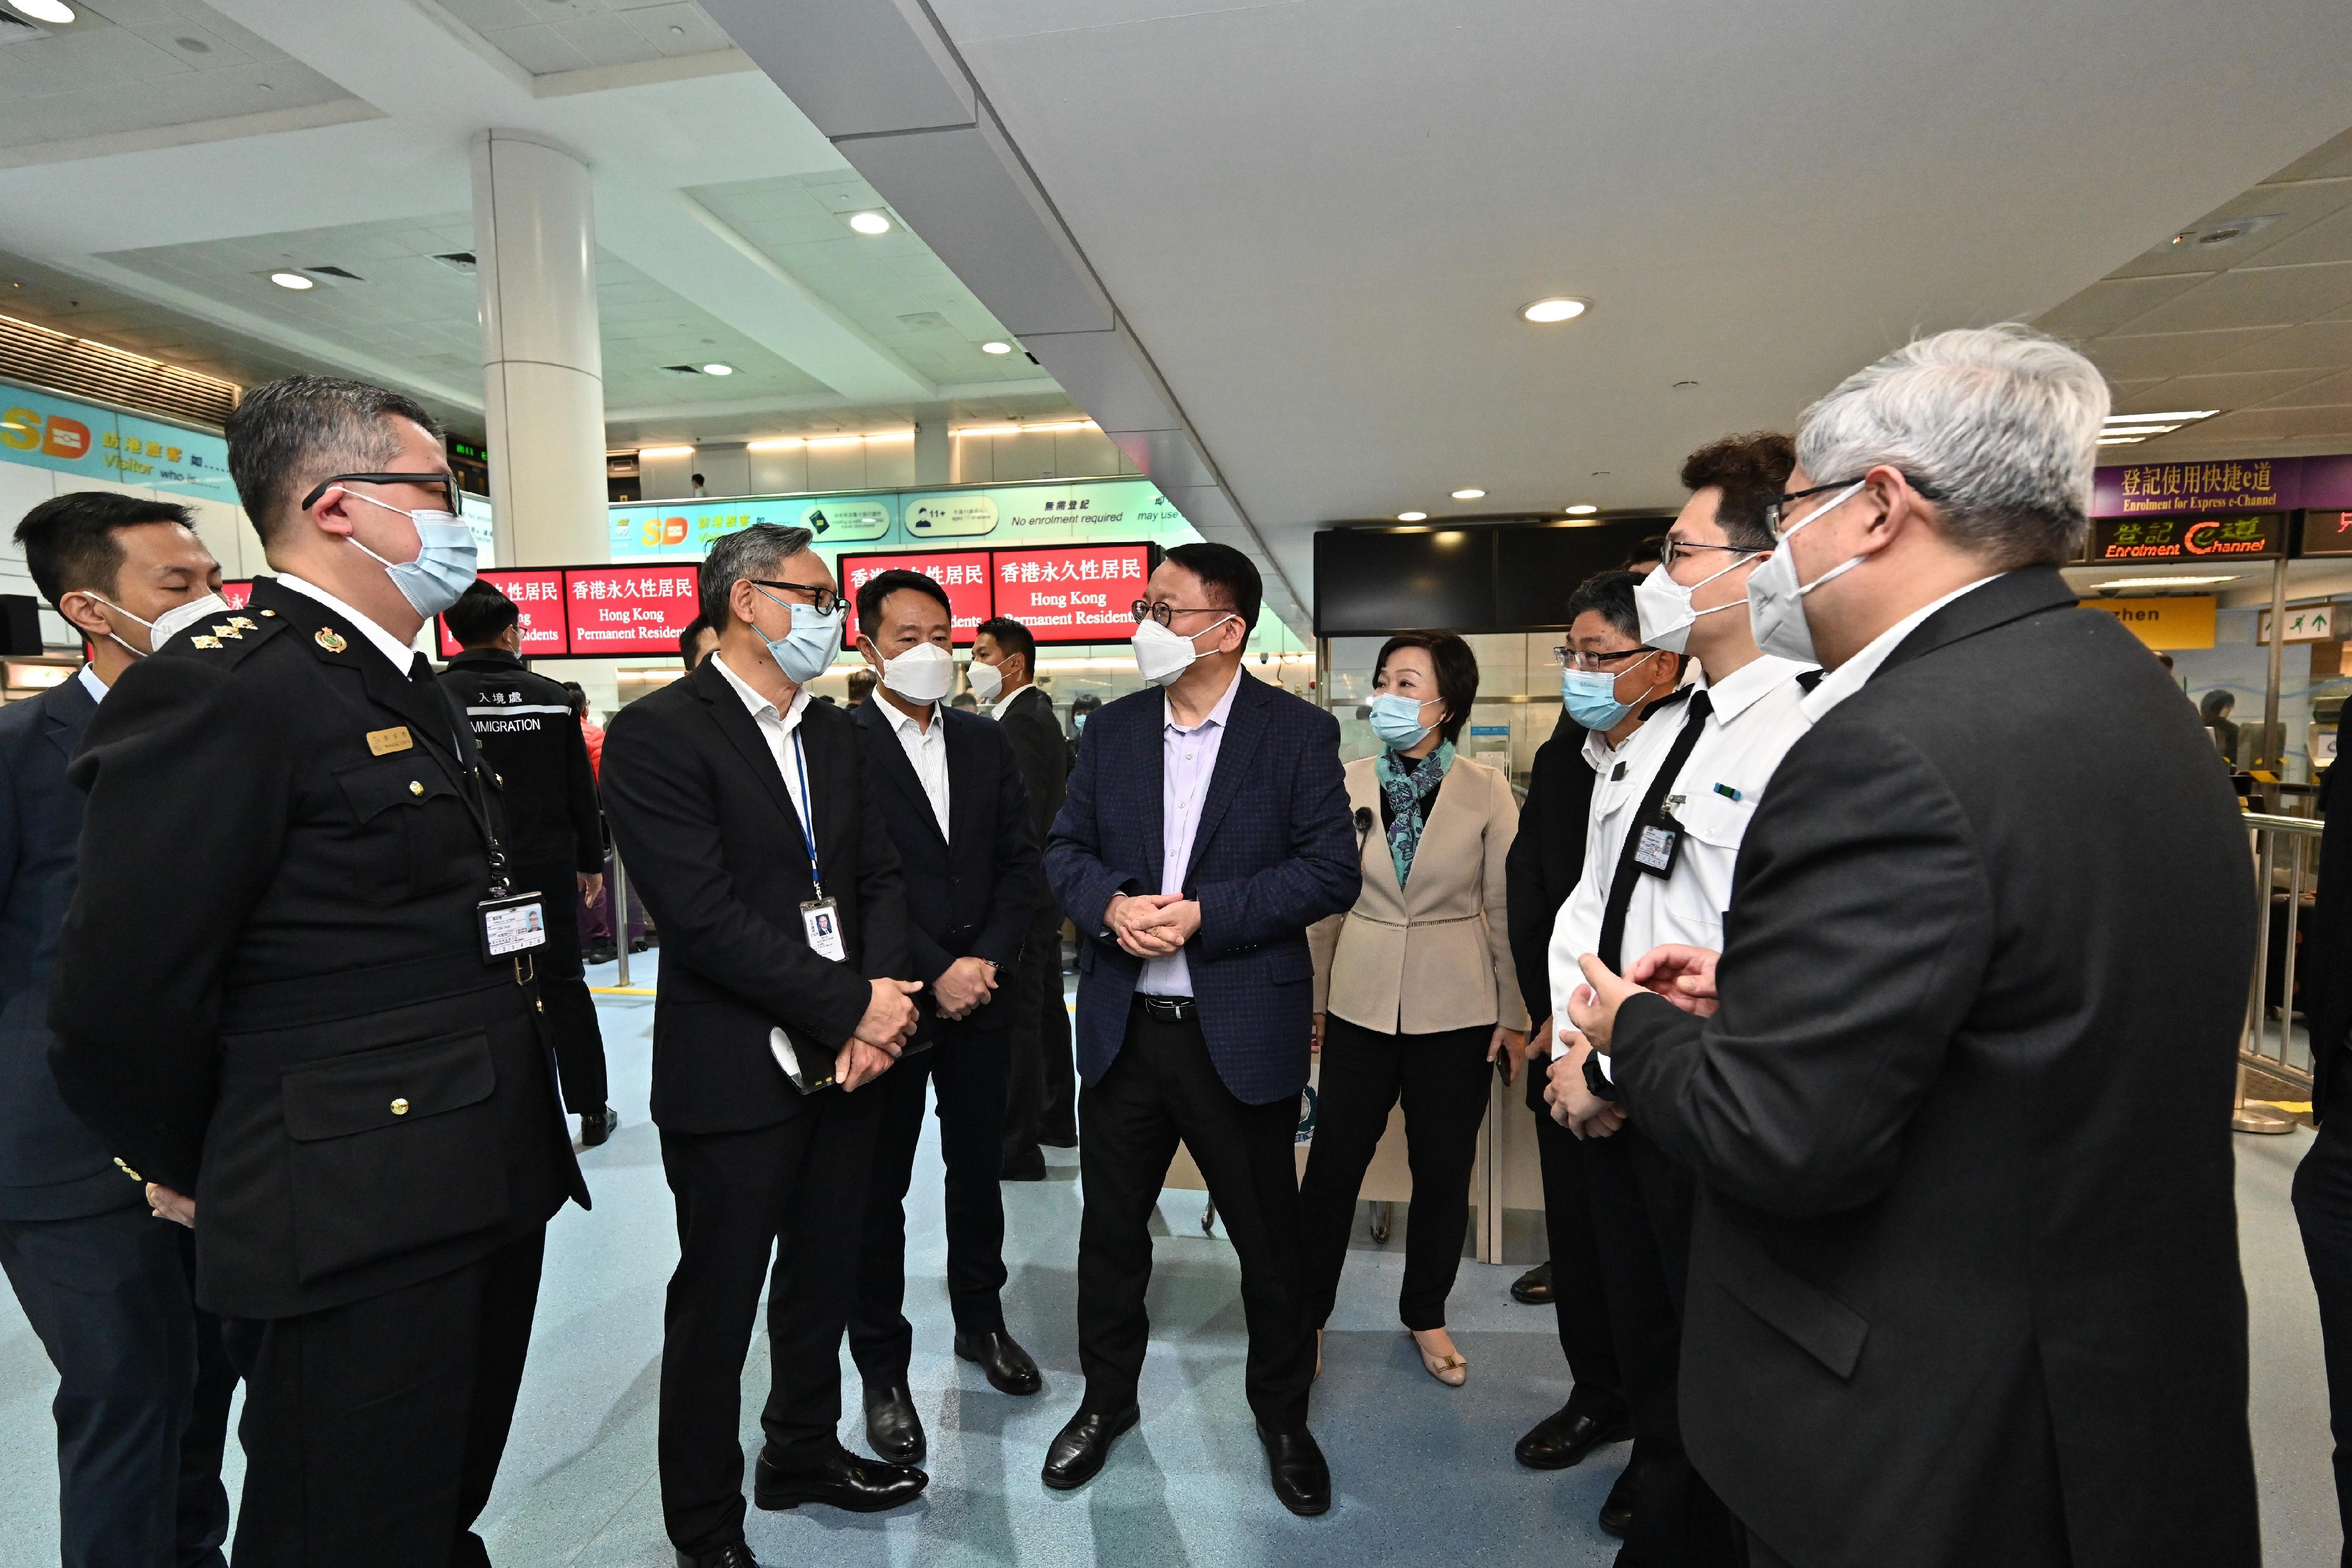 The Acting Chief Executive, Mr Chan Kwok-ki (fourth left), this morning (February 6) inspected the Lo Wu Control Point to learn about the situation on the first day of full resumption of normal travel between Hong Kong and the Mainland. Other officials present included the Secretary for Transport and Logistics, Mr Lam Sai-hung (third right); the Secretary for Education, Dr Choi Yuk-lin (fourth right); and the Under Secretary for Security, Mr Michael Cheuk (second left).